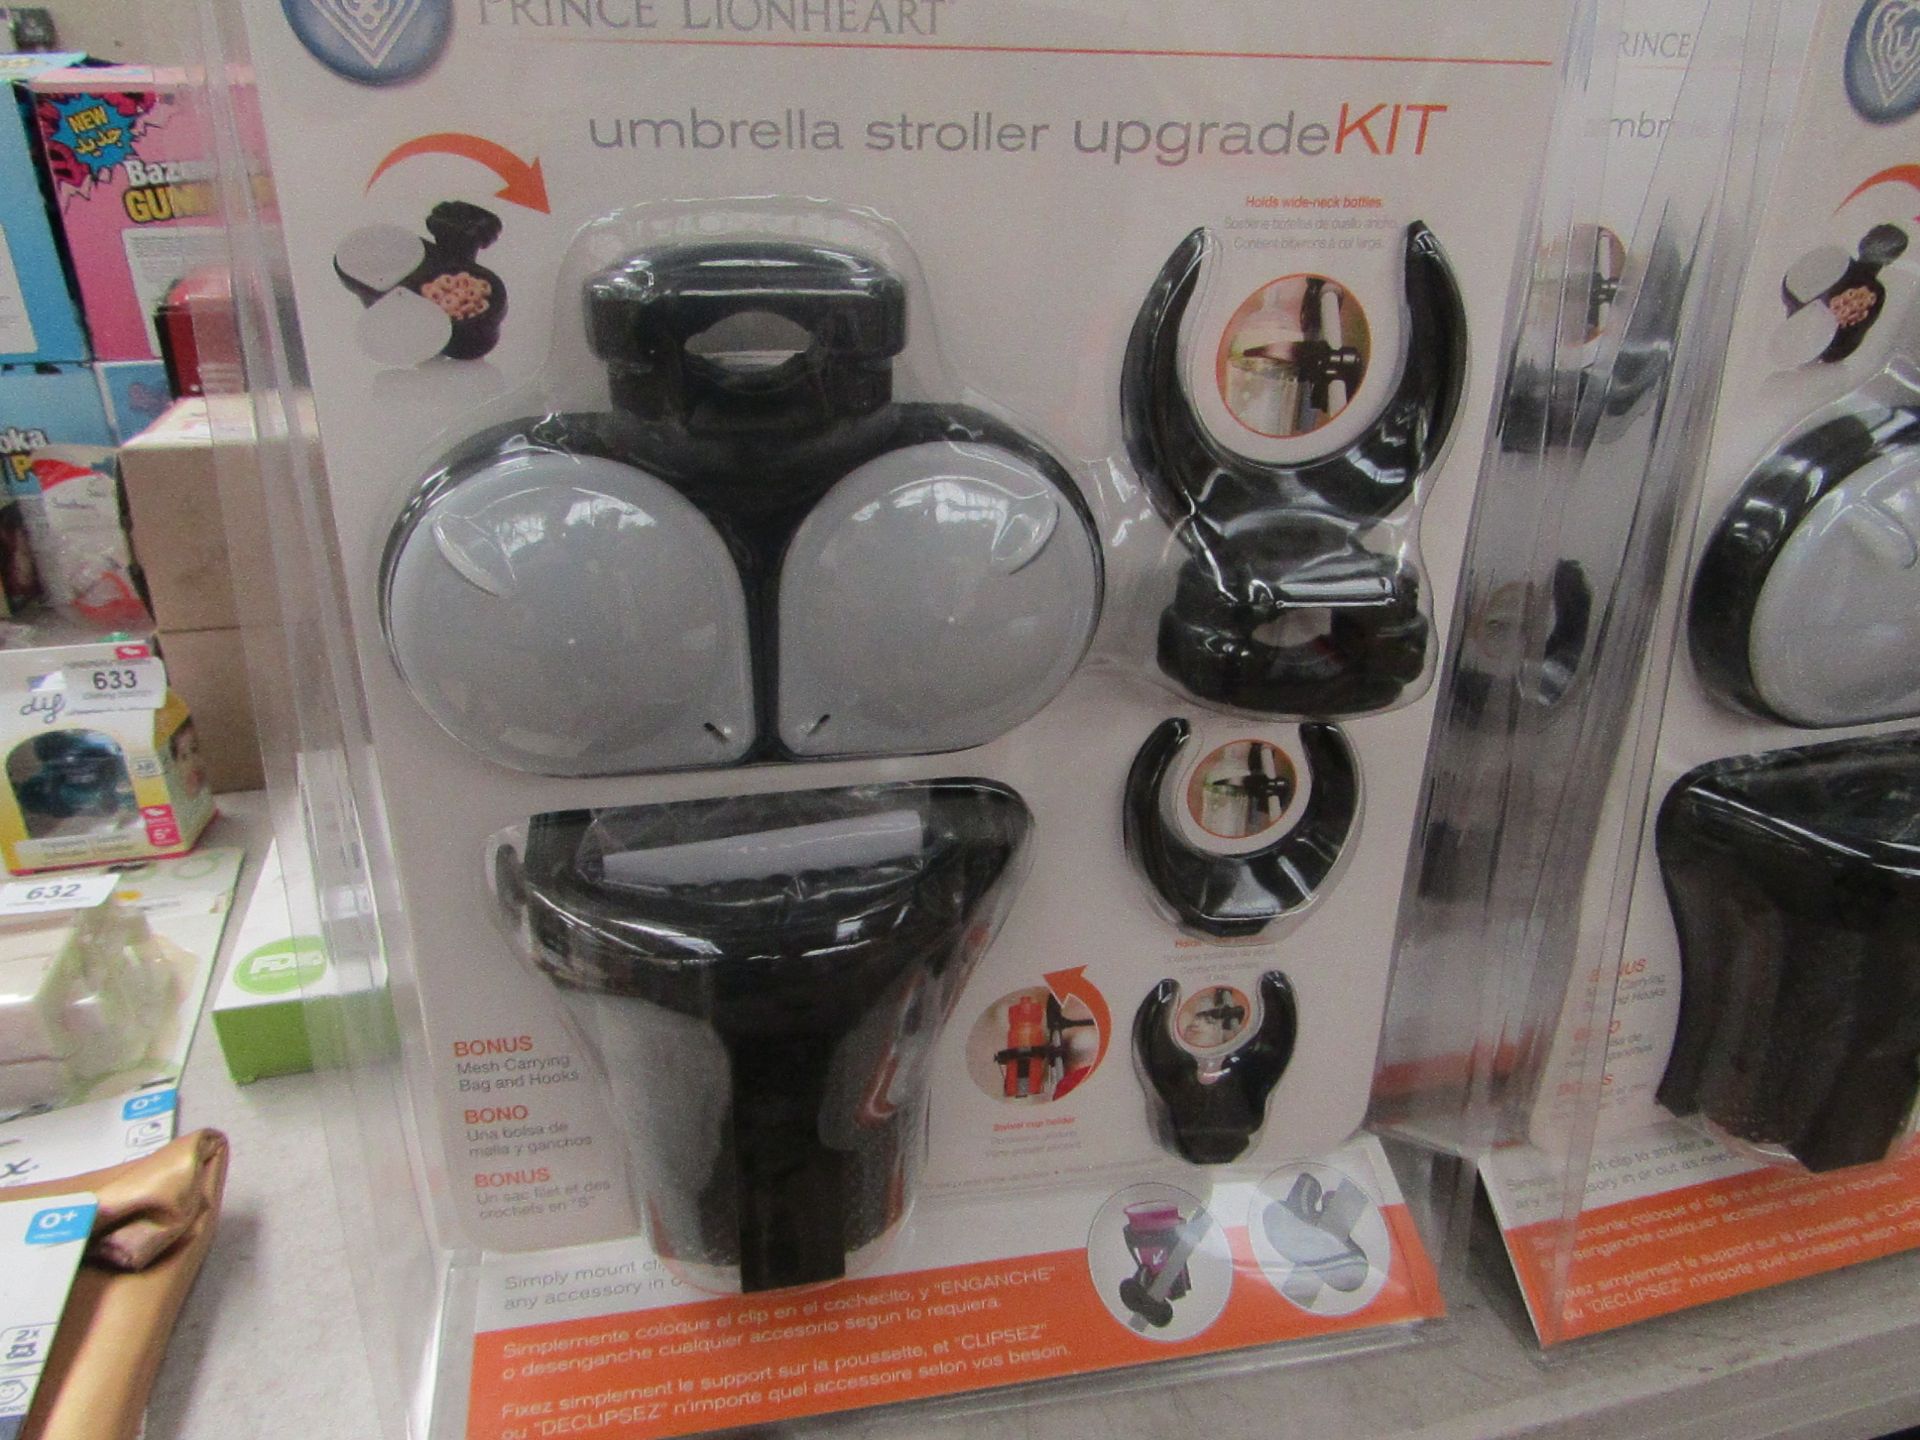 2 x Prince Lionheart Universal Umbrella Stroller upgrade kits, RRP £7.95 each new and packaged.